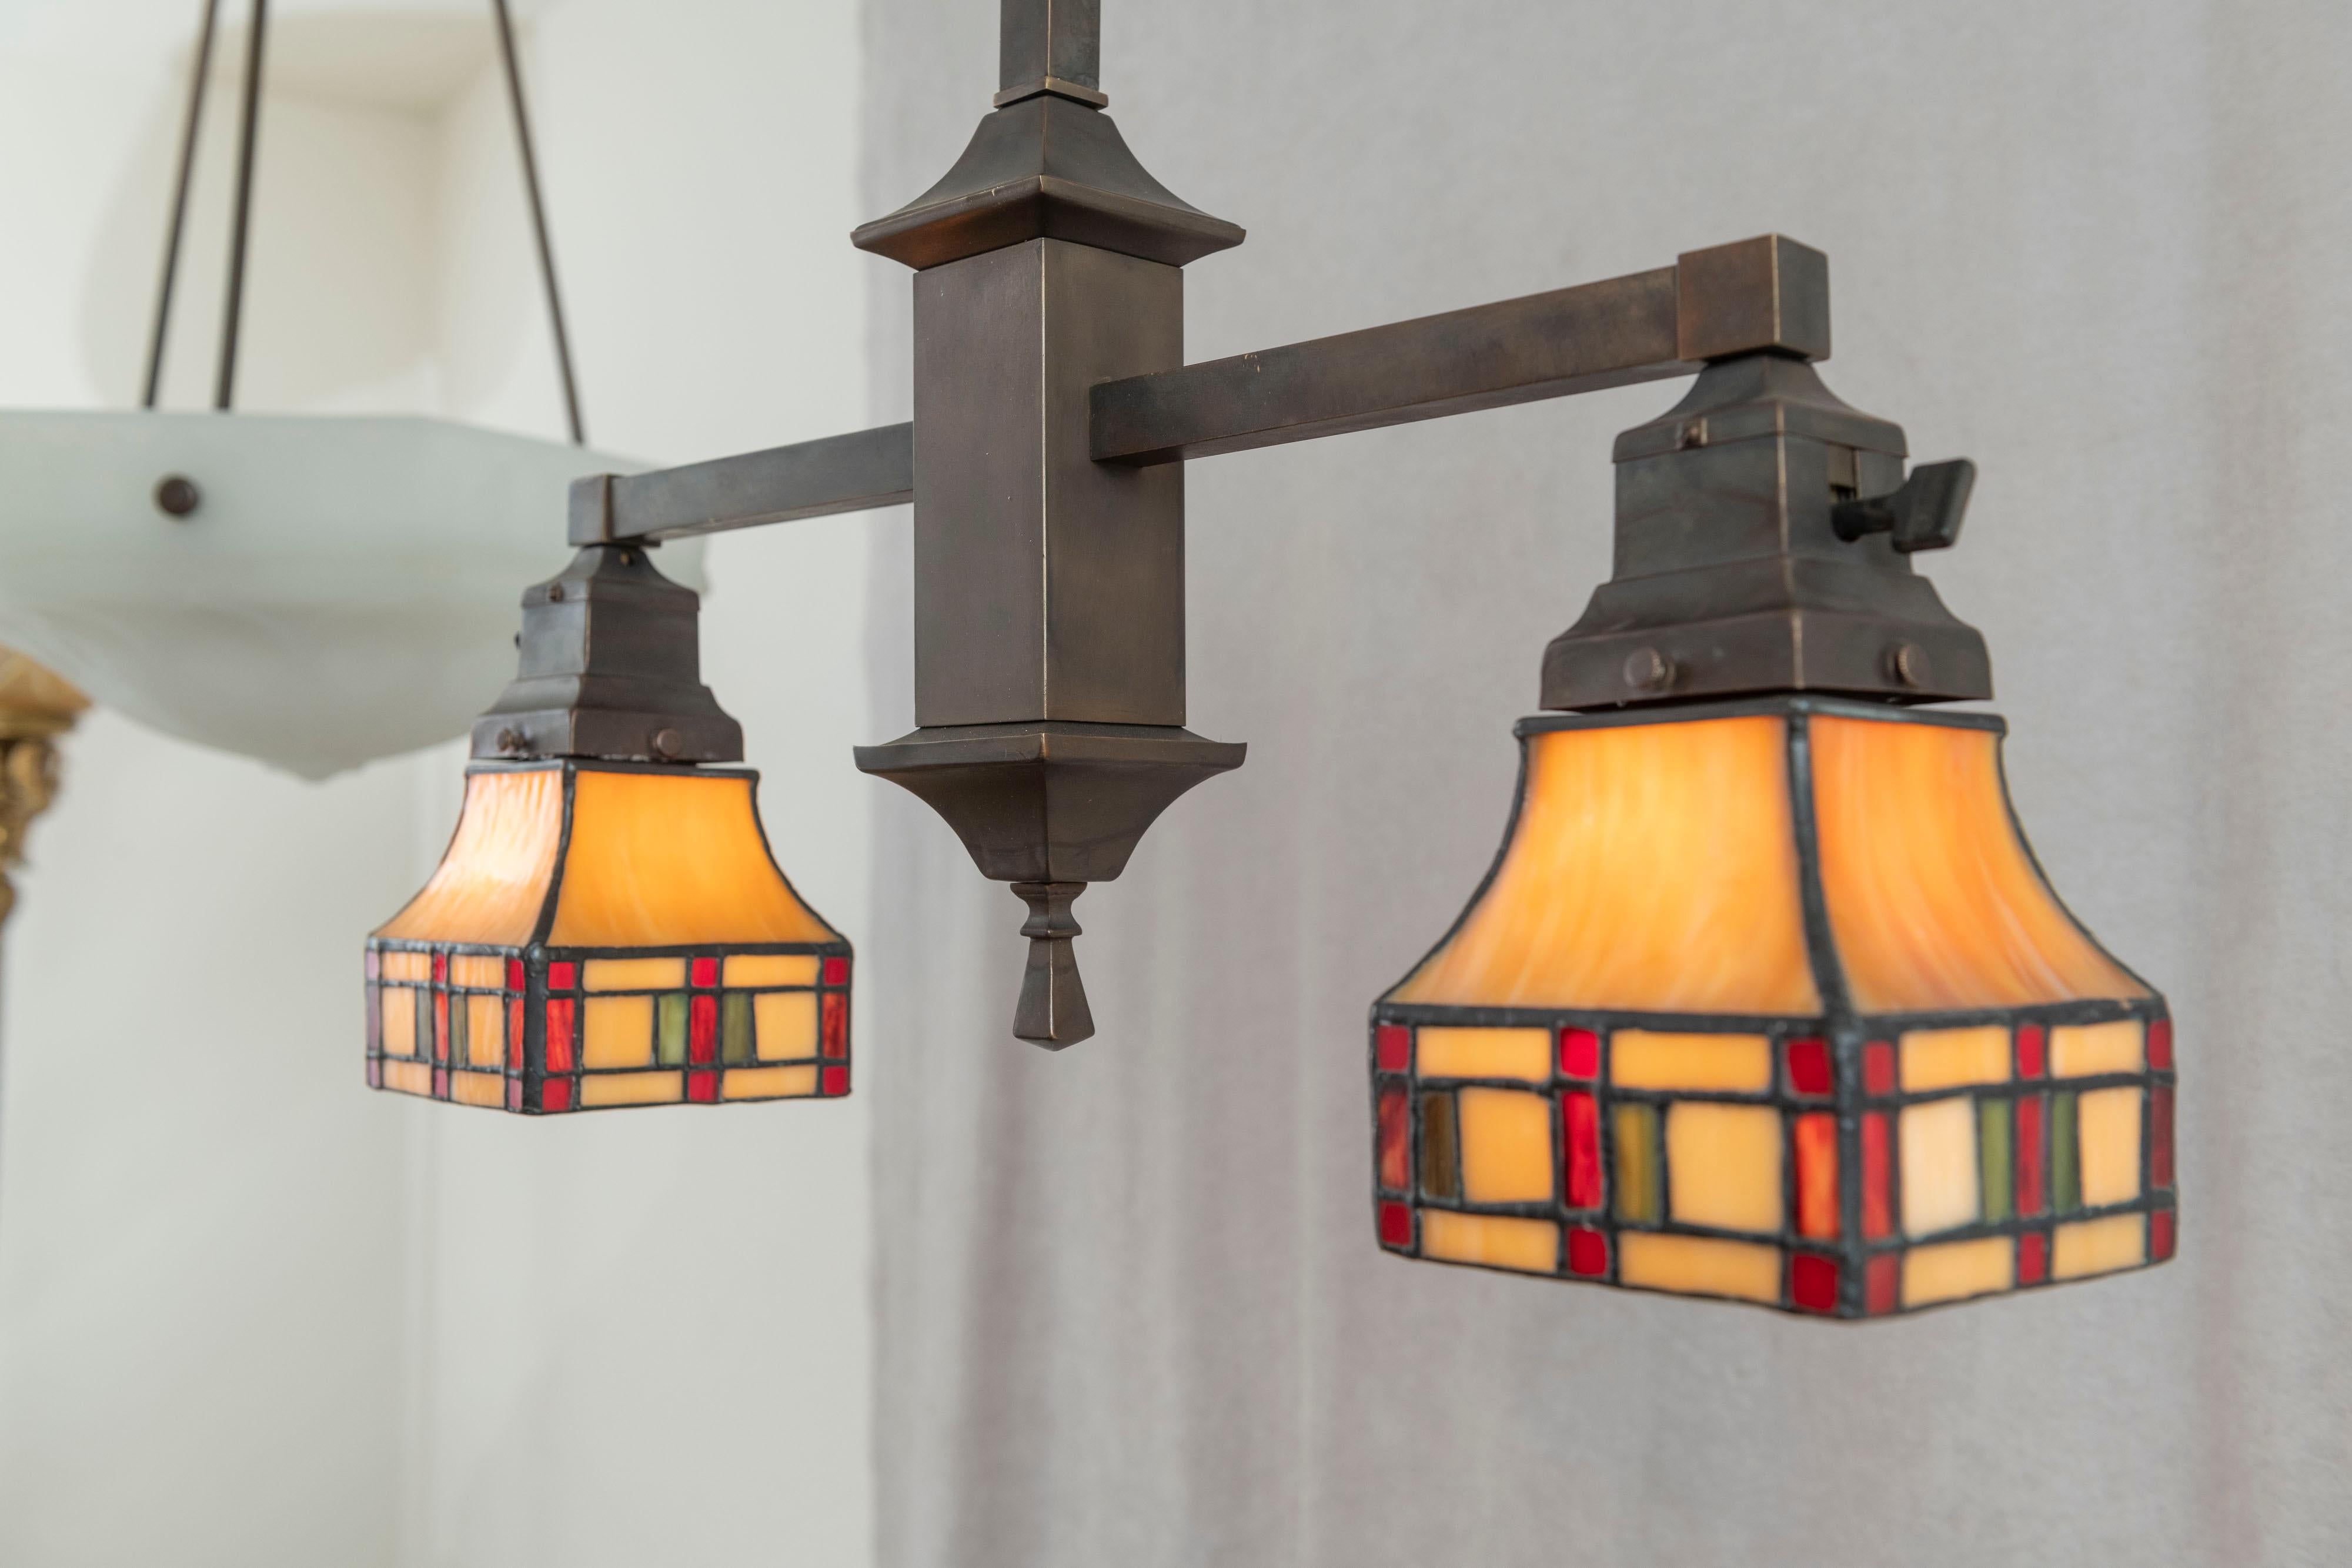 Early 20th Century 2 Arm Arts & Crafts Chandelier w/ Original Leaded Glass Shades, ca. 1910